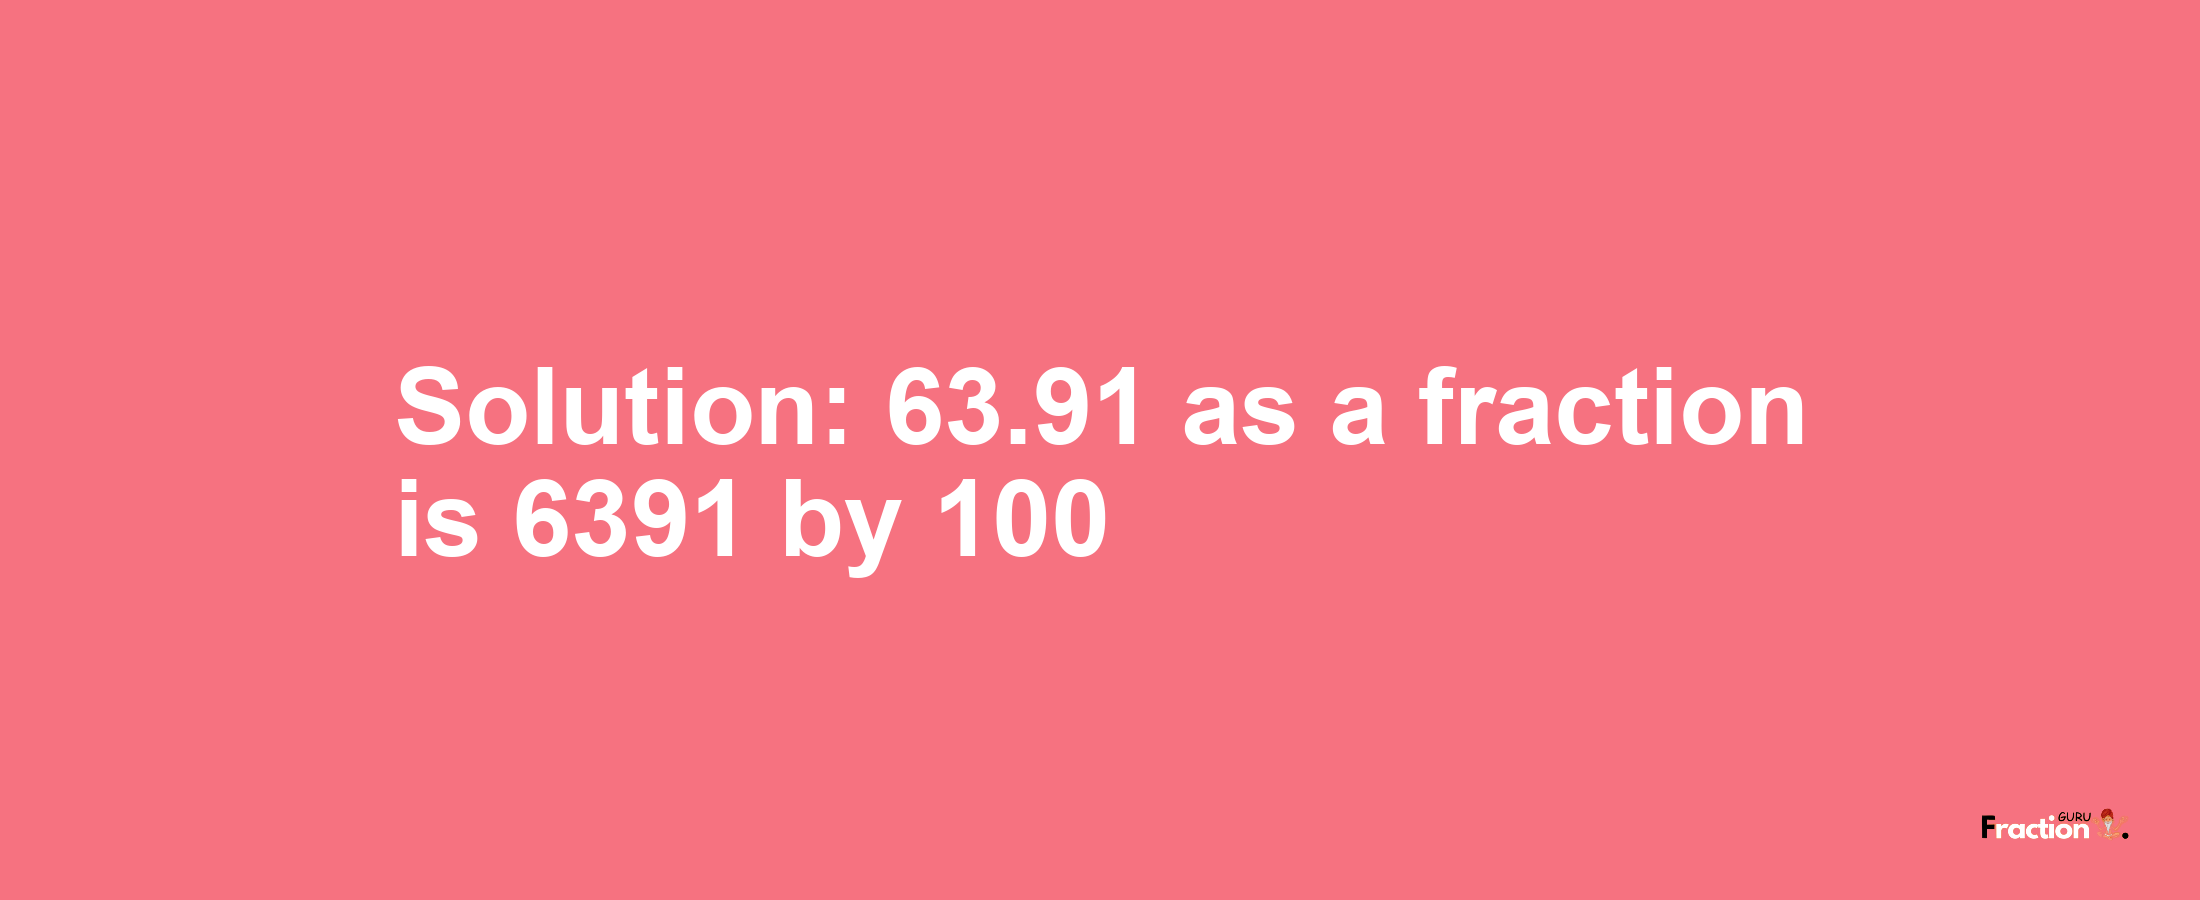 Solution:63.91 as a fraction is 6391/100